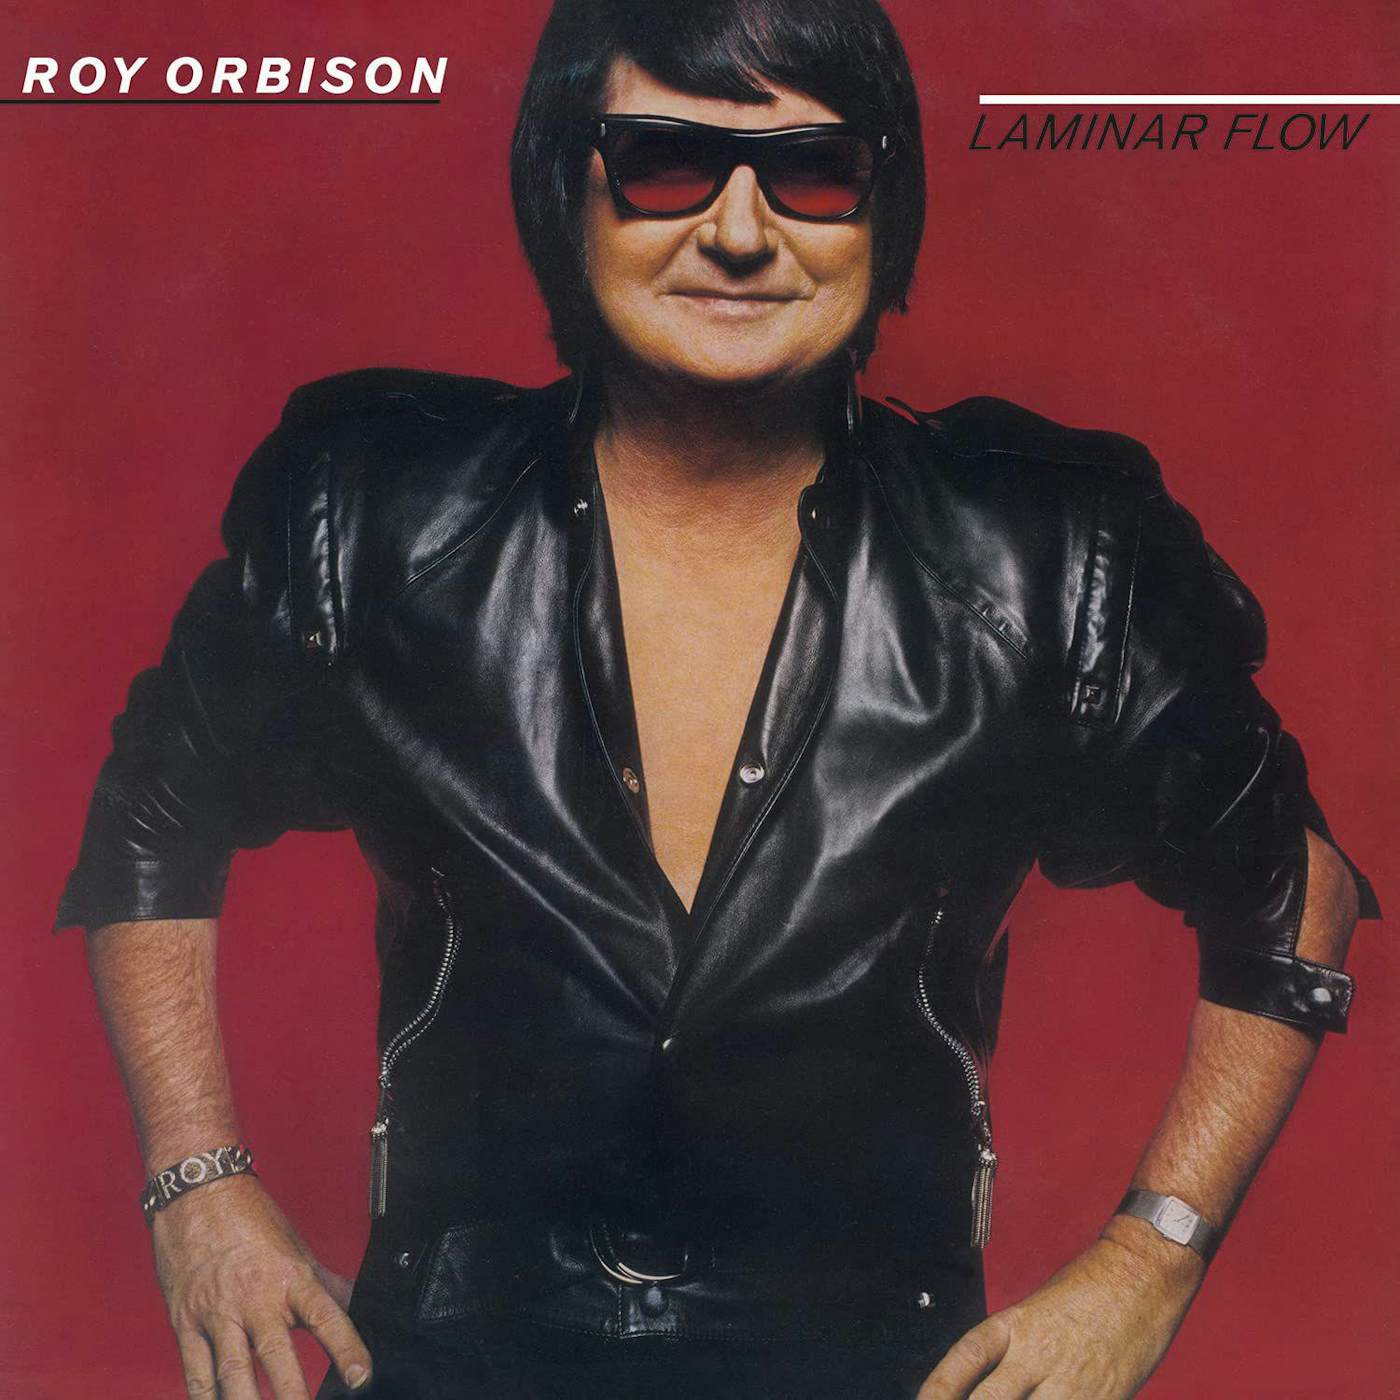 Roy Orbison Laminar Flow (Limited/Bloody Mary Colored Vinyl Record/180g)